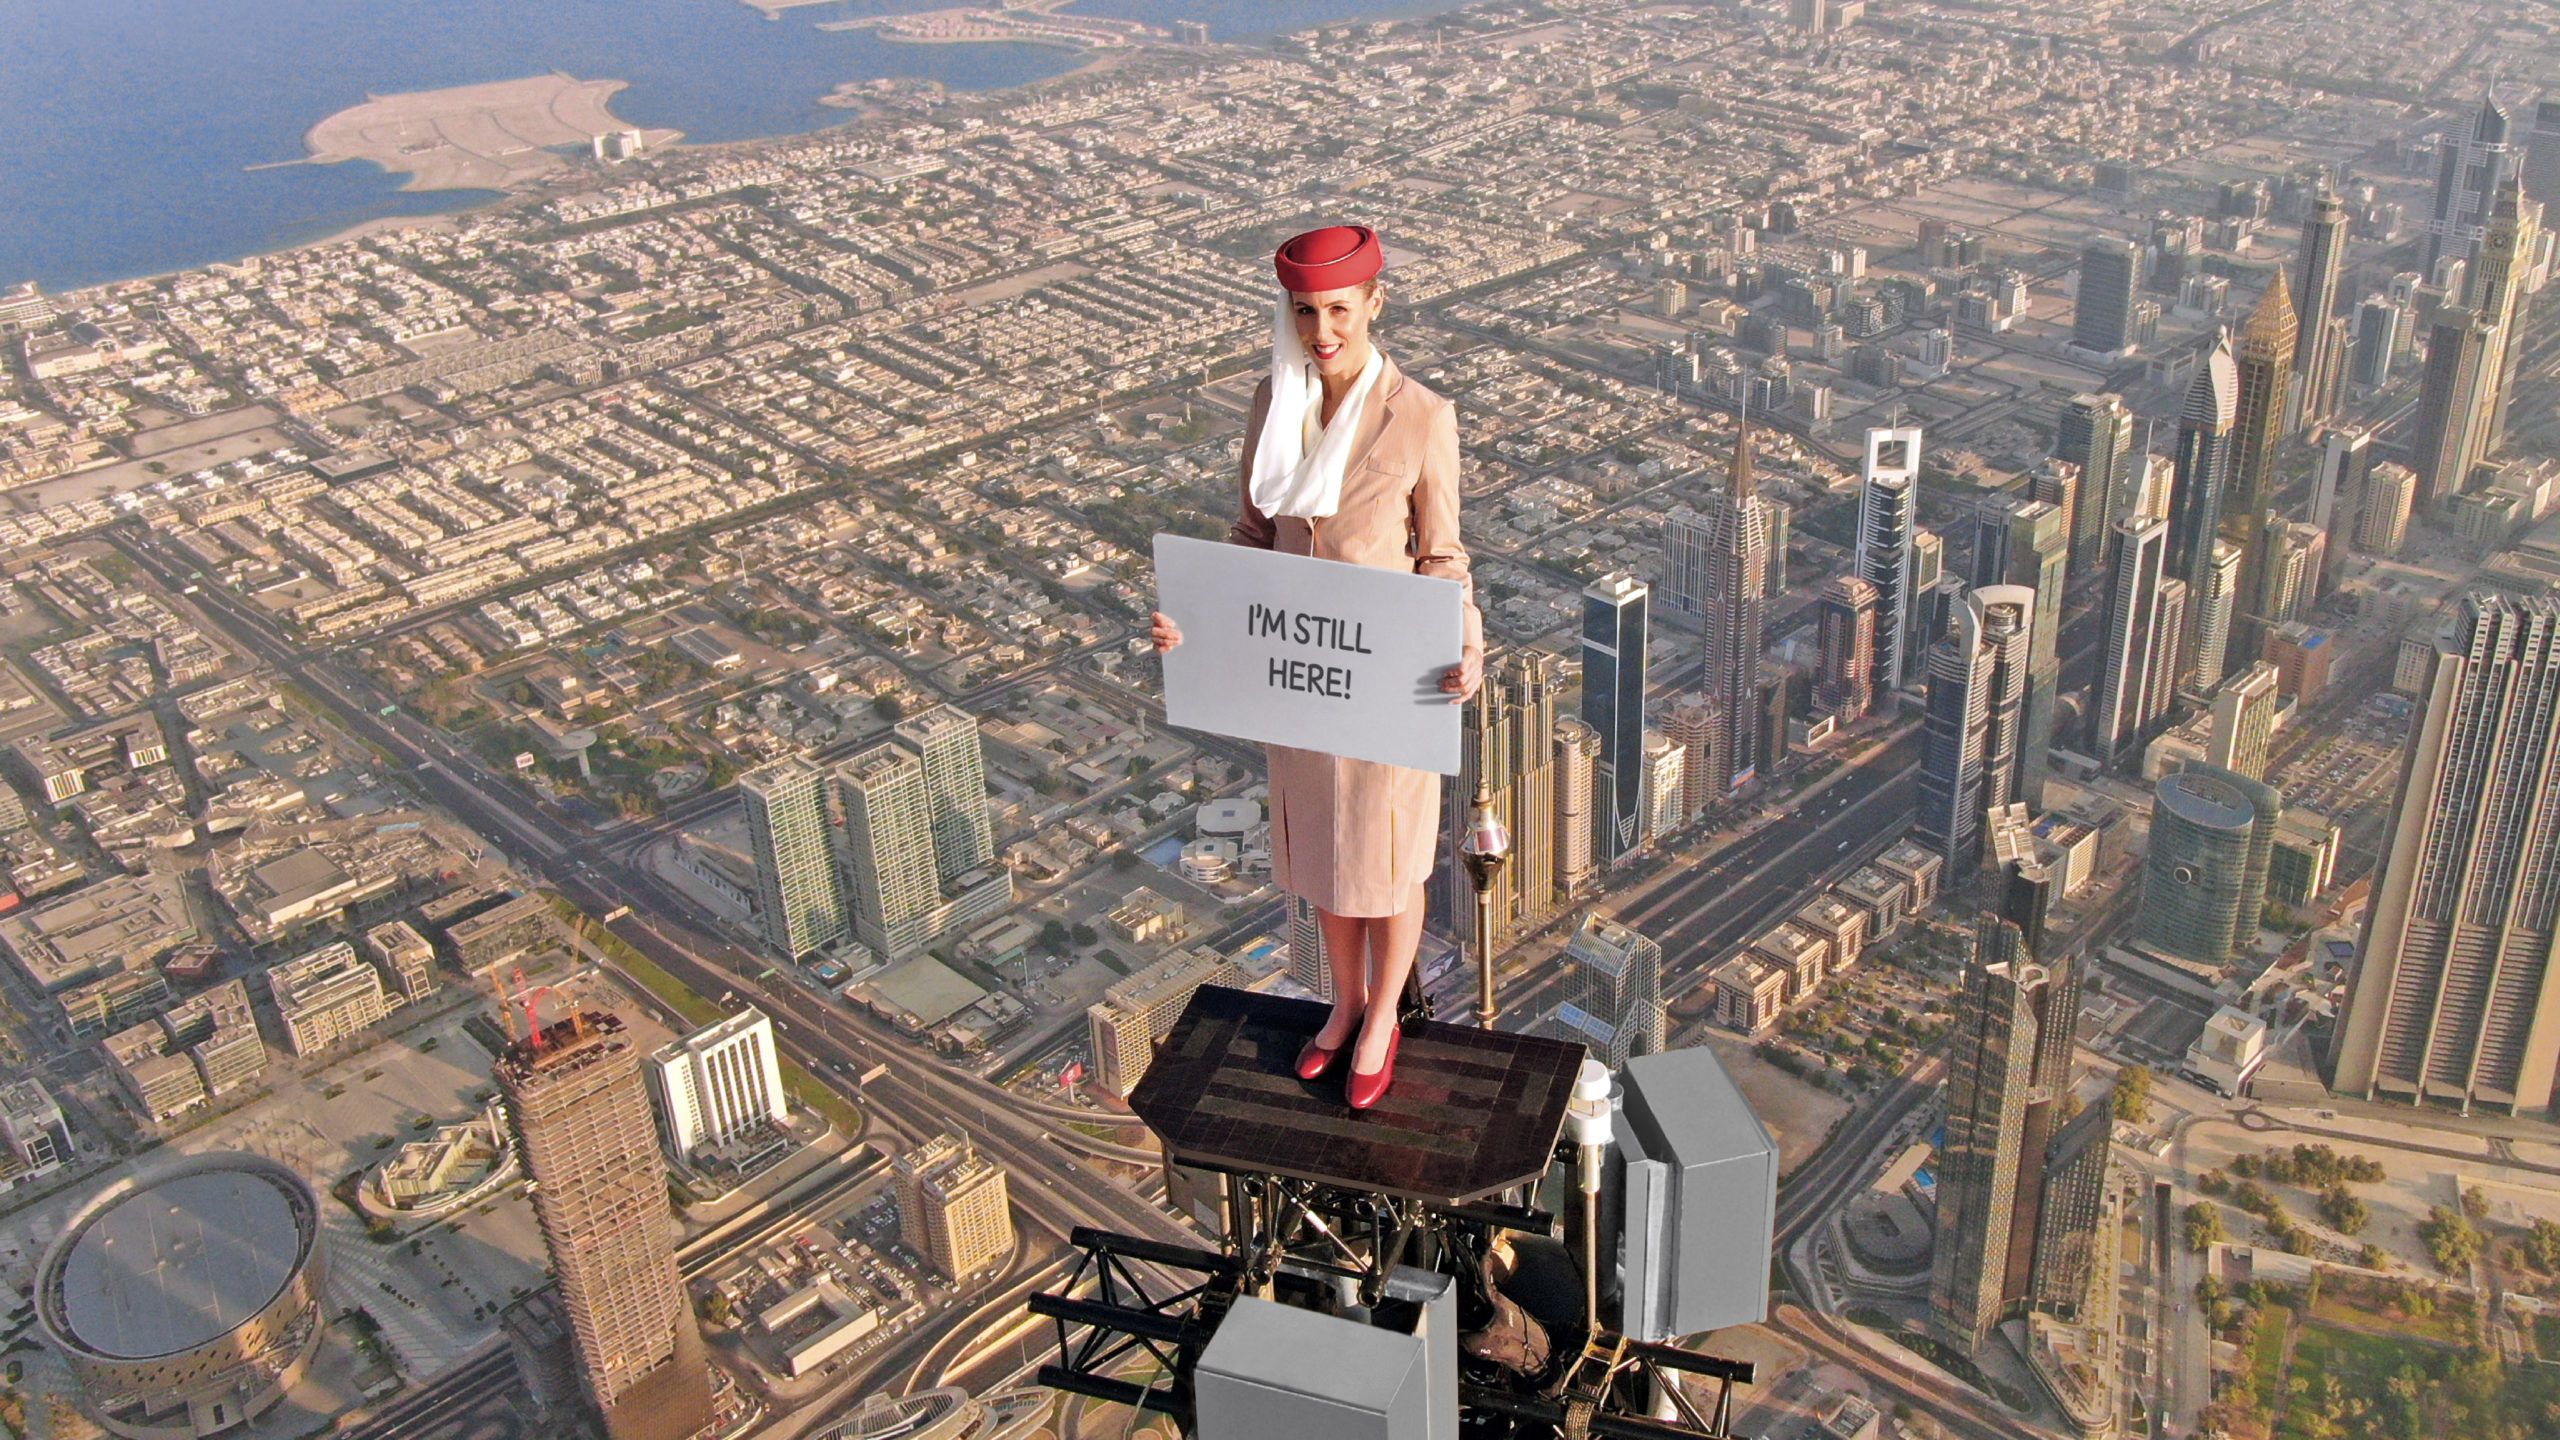 The brave stuntwoman is standing at the pinnacle of the Burj Khalifa by Emaar once again, holding up message boards with an invitation to visit Expo 2020 Dubai, on the iconic Emirates A380.